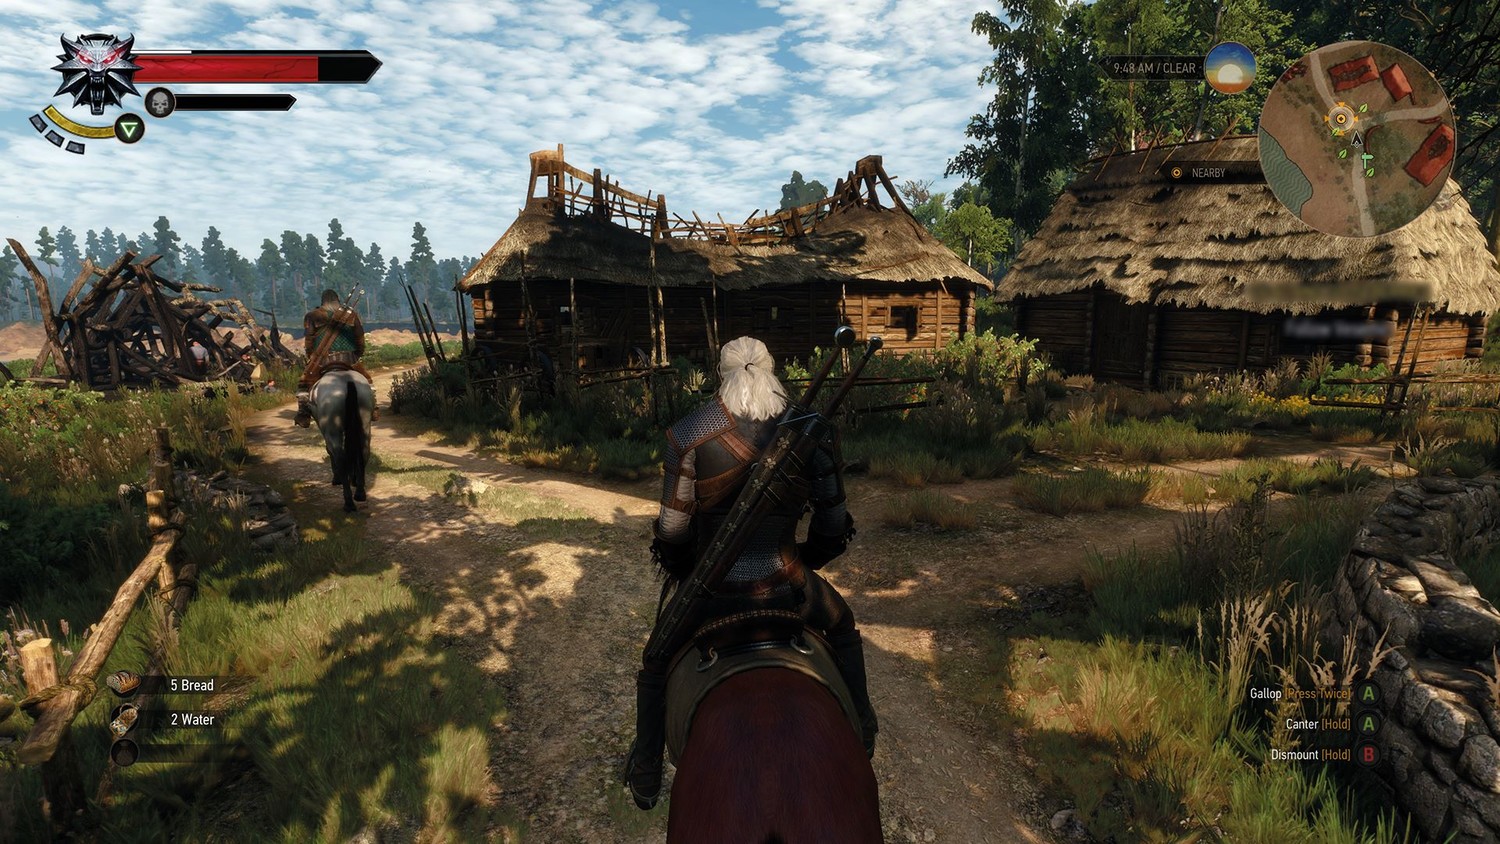 Скриншот 1 к игре The Witcher 3: Wild Hunt - Game of the Year Edition [v 1.31 + 18 DLC] (2015) PC | Repack от xatab